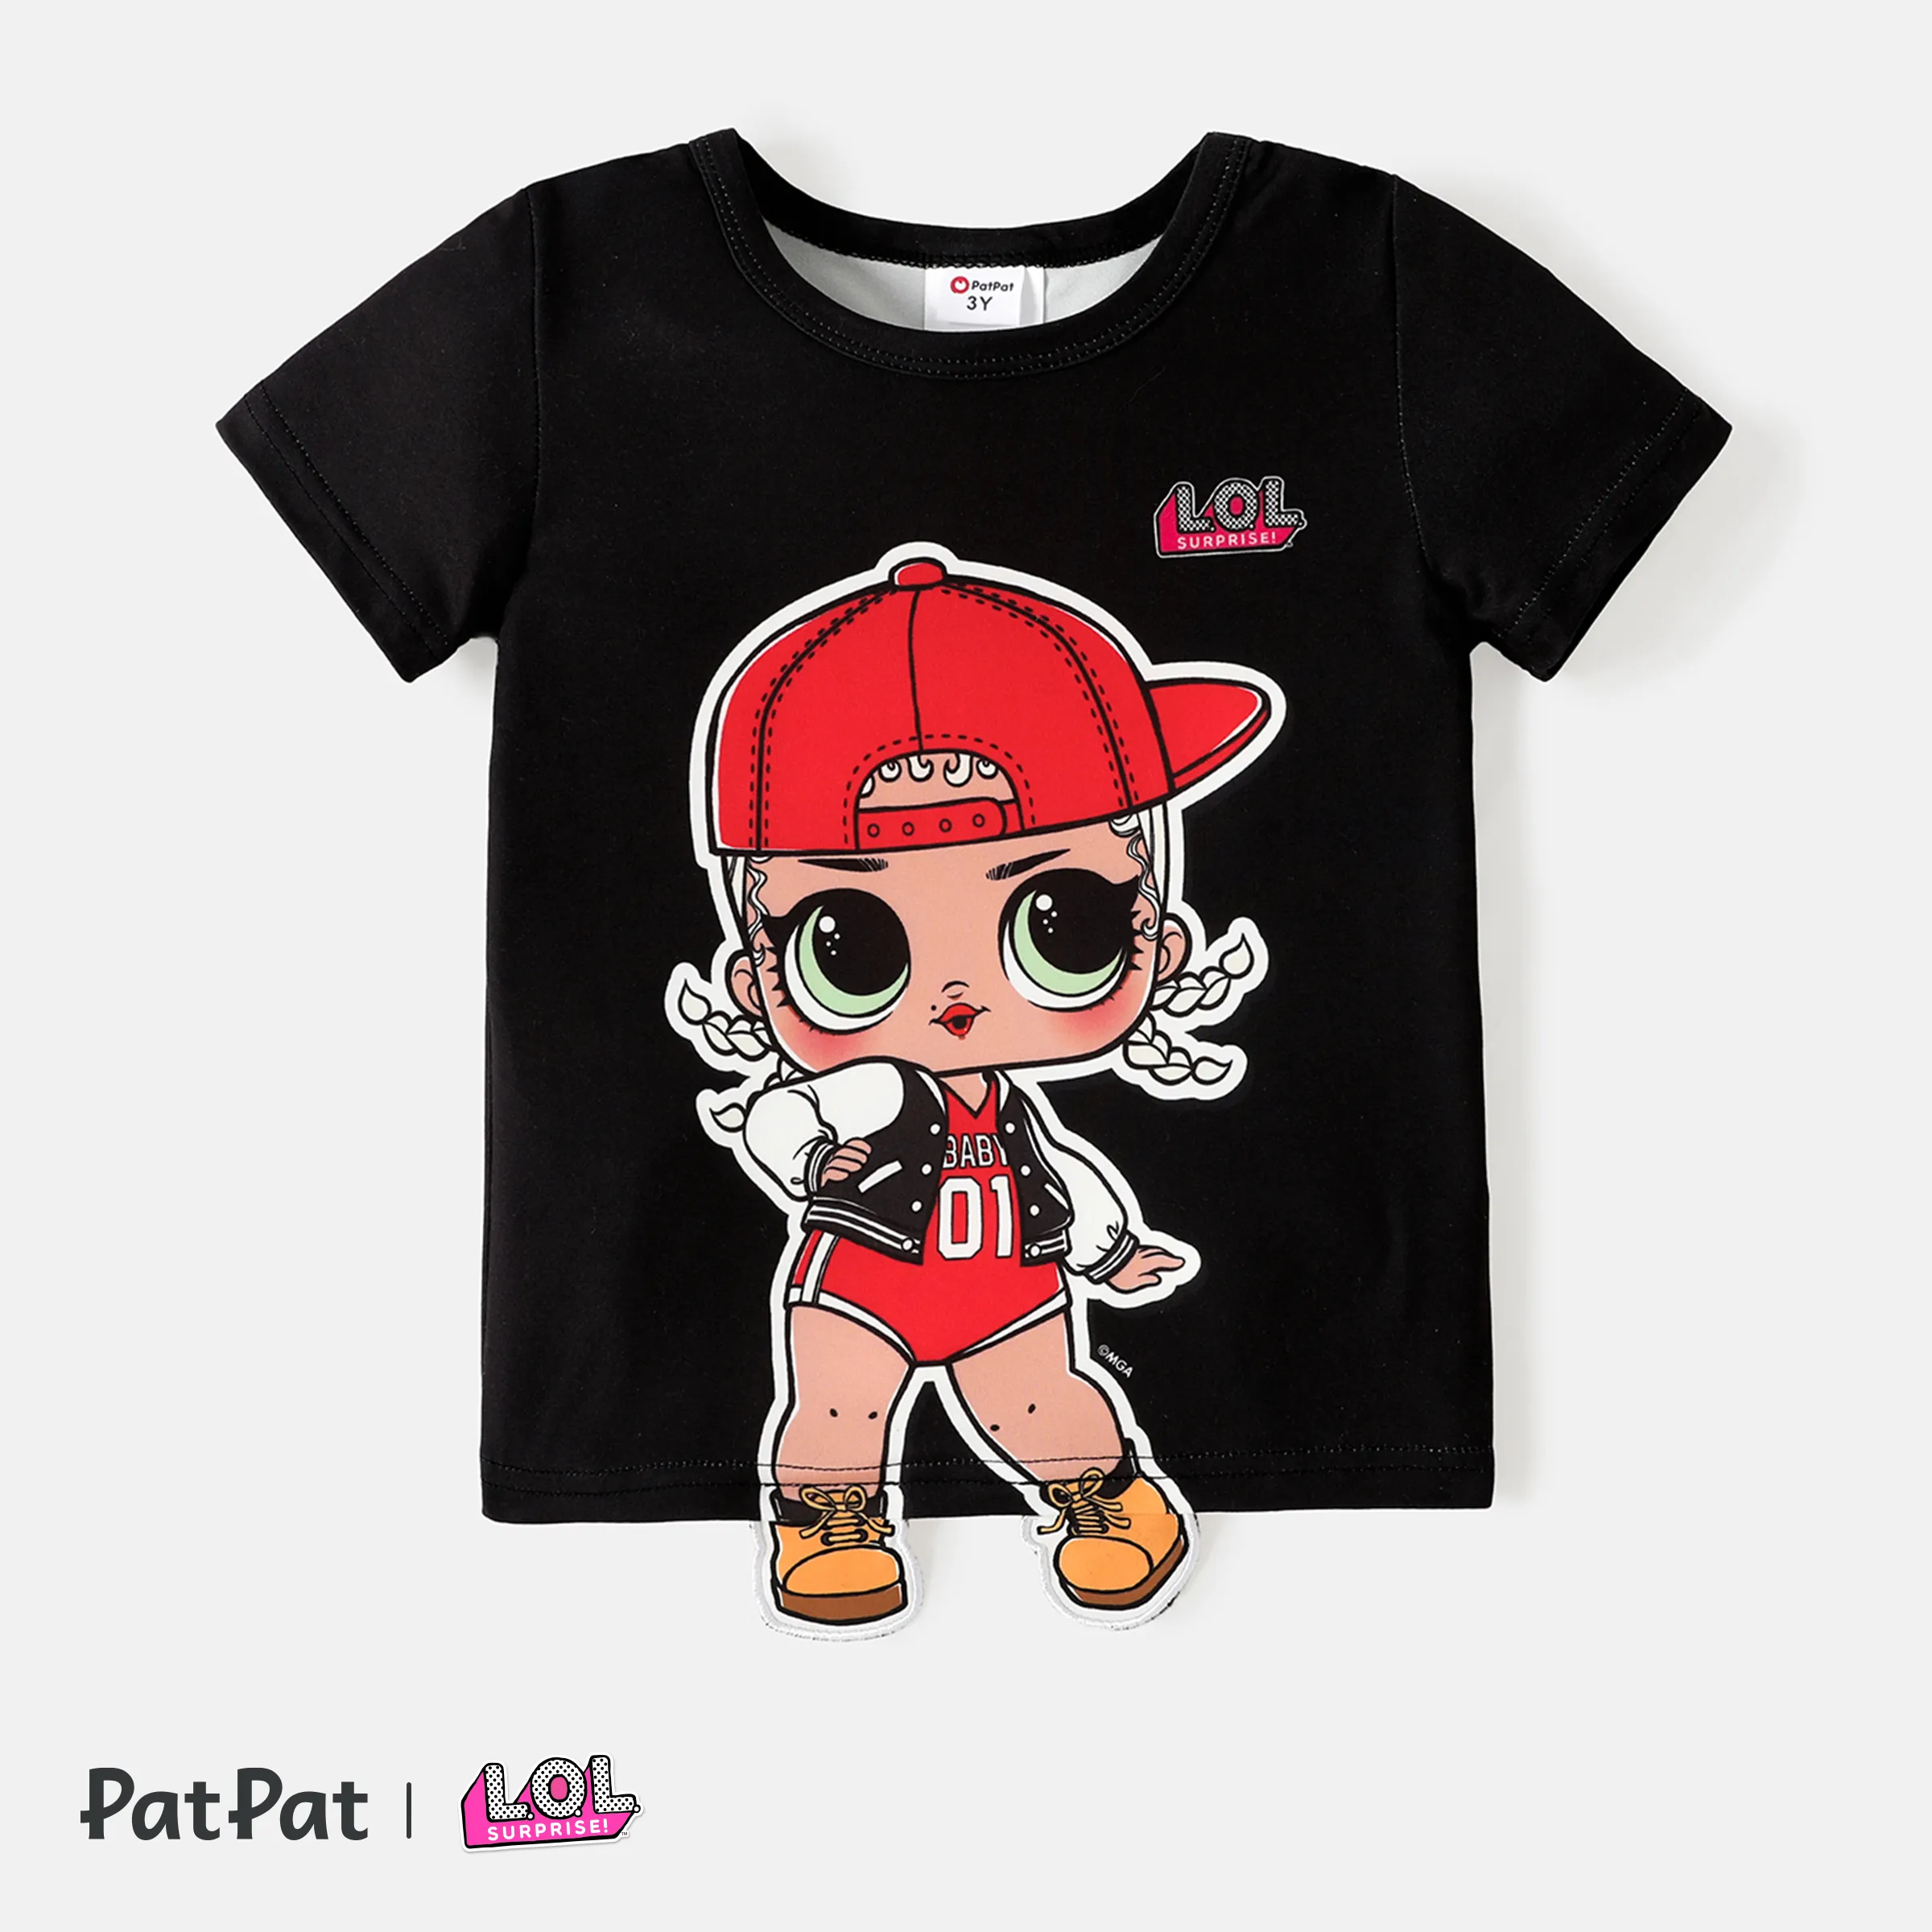 L.O.L. SURPRISE! Toddler/Kid Girl Character Print Short-sleeve Tee